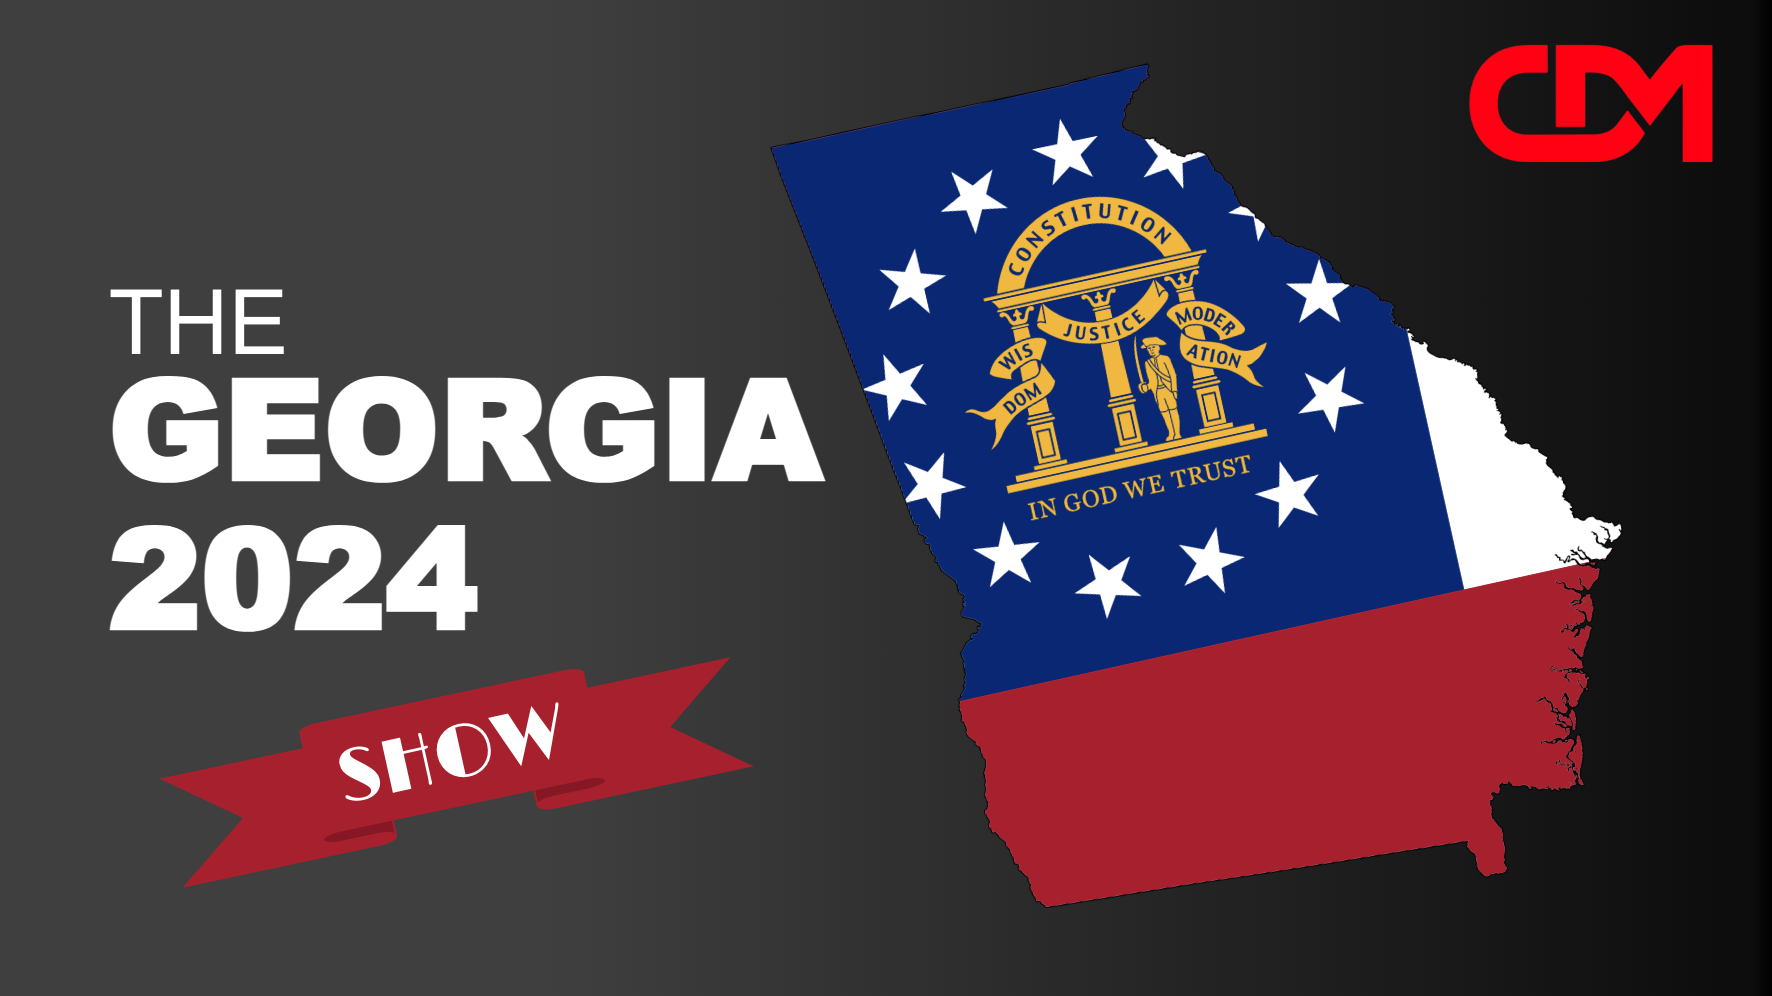 LIVE 7pm EST: The Georgia 2024 Show! With Charlice Byrd, David Cross, BKP